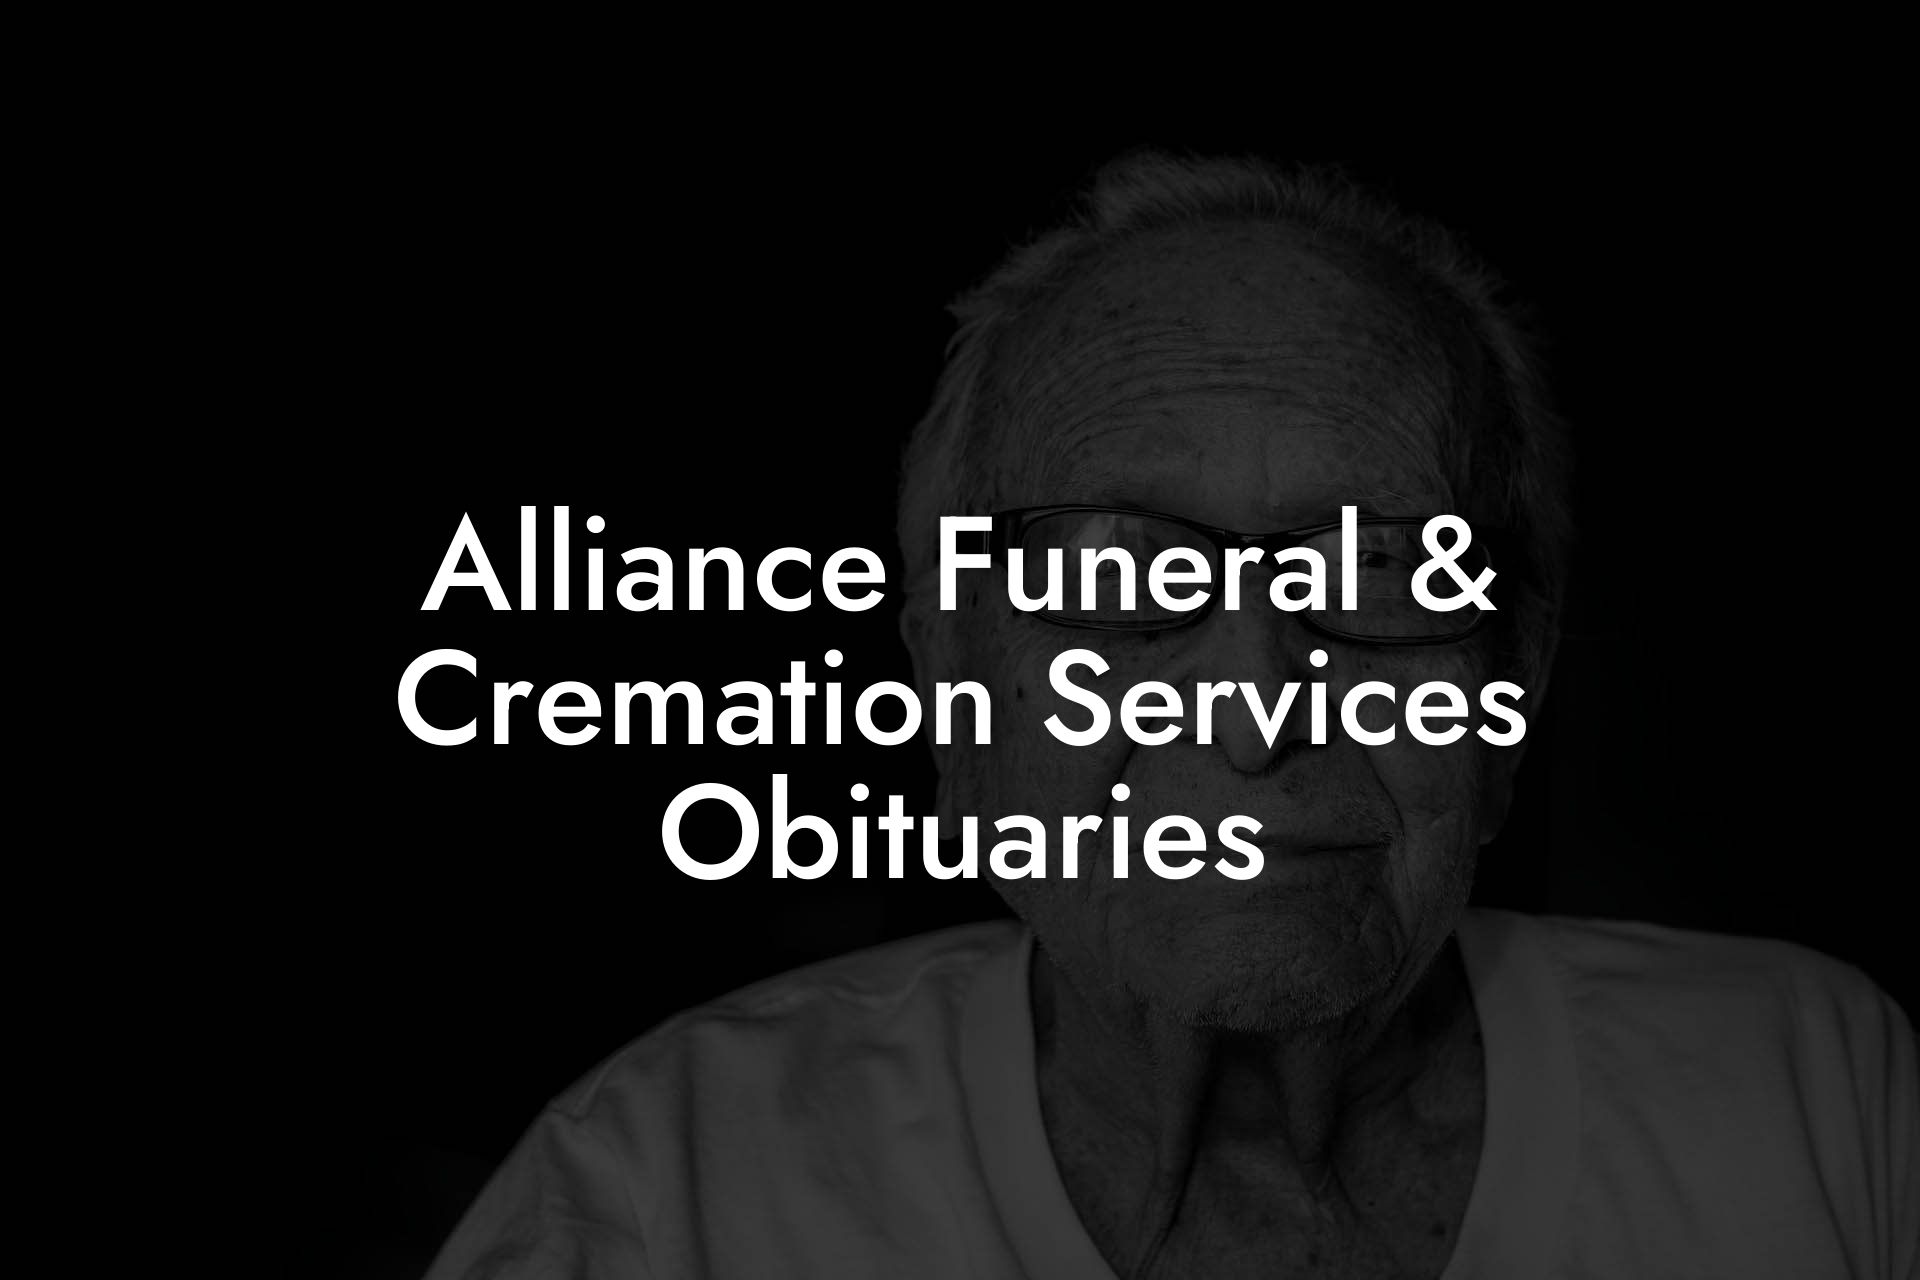 Alliance Funeral & Cremation Services Obituaries